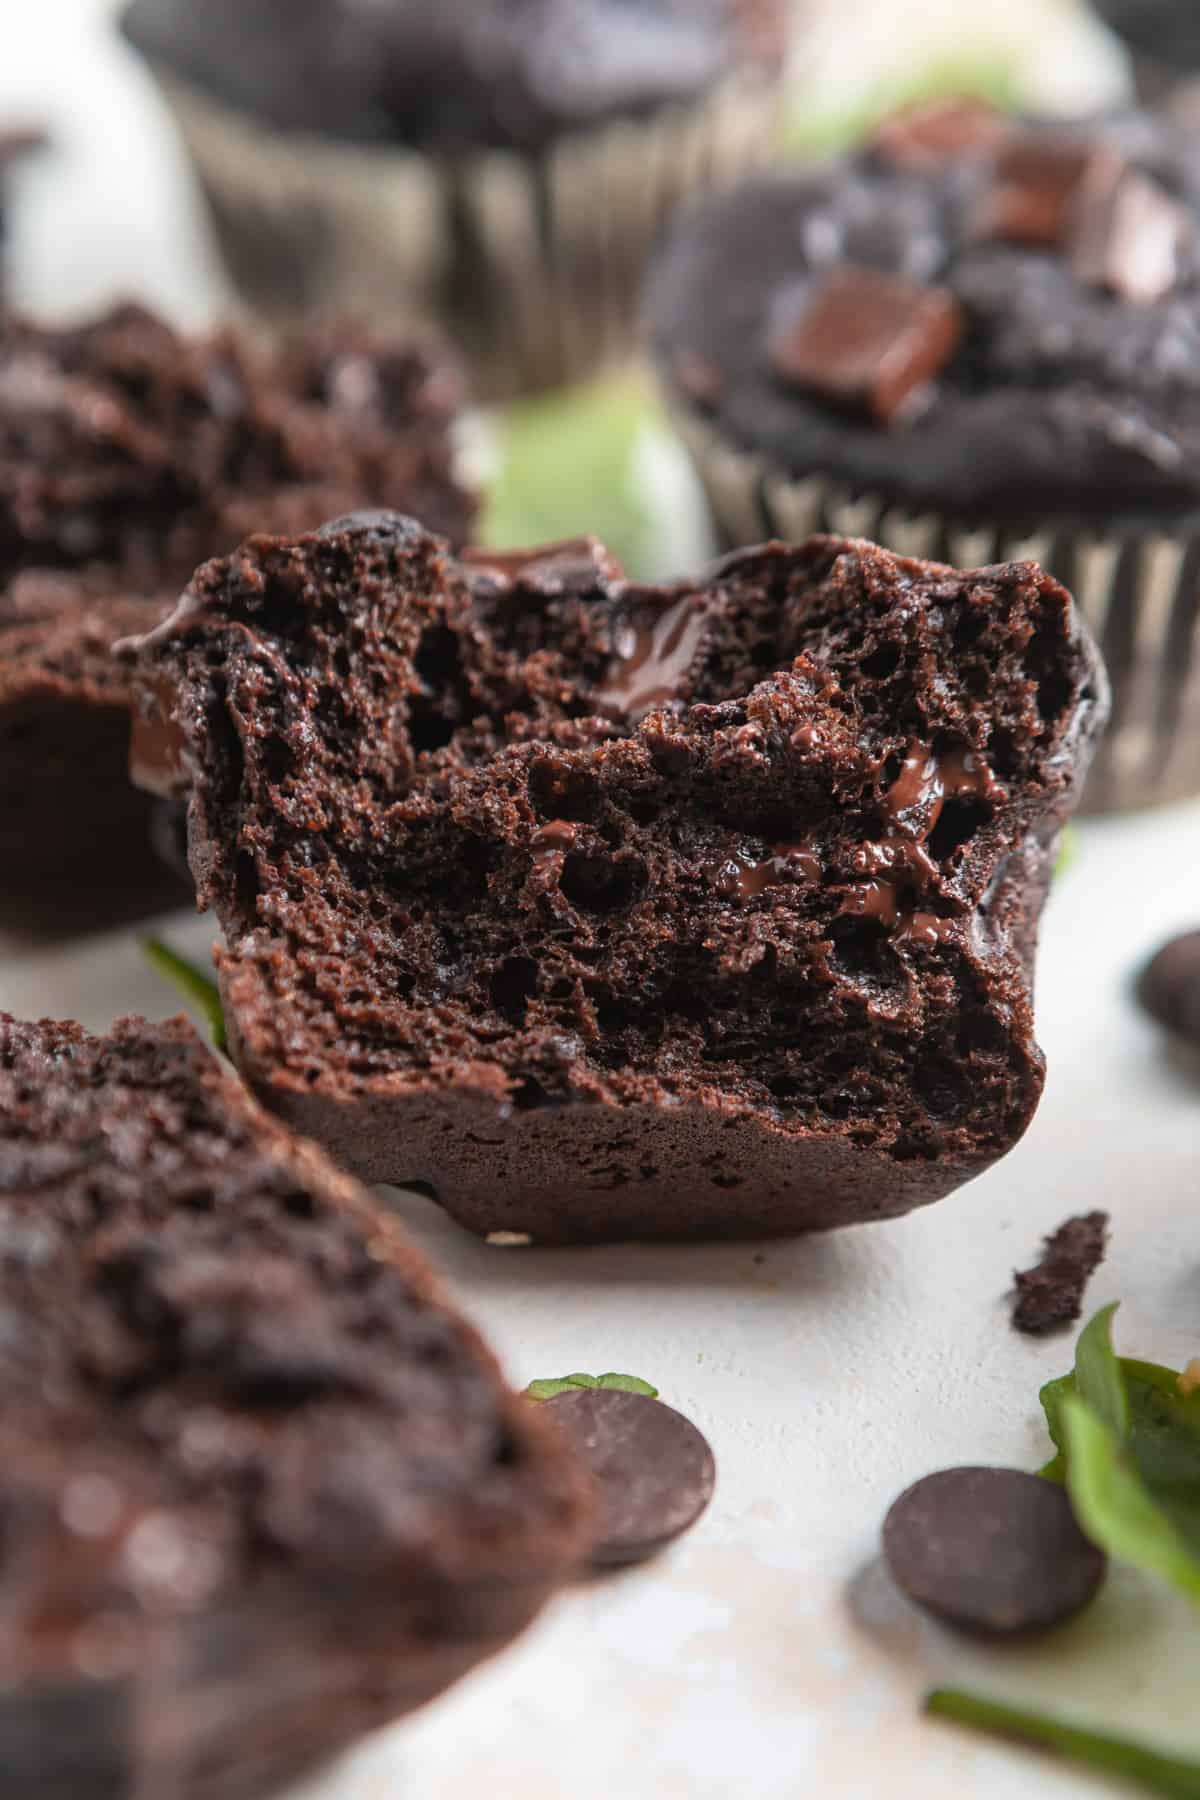 Chocolate green smoothie muffin with bite taken.